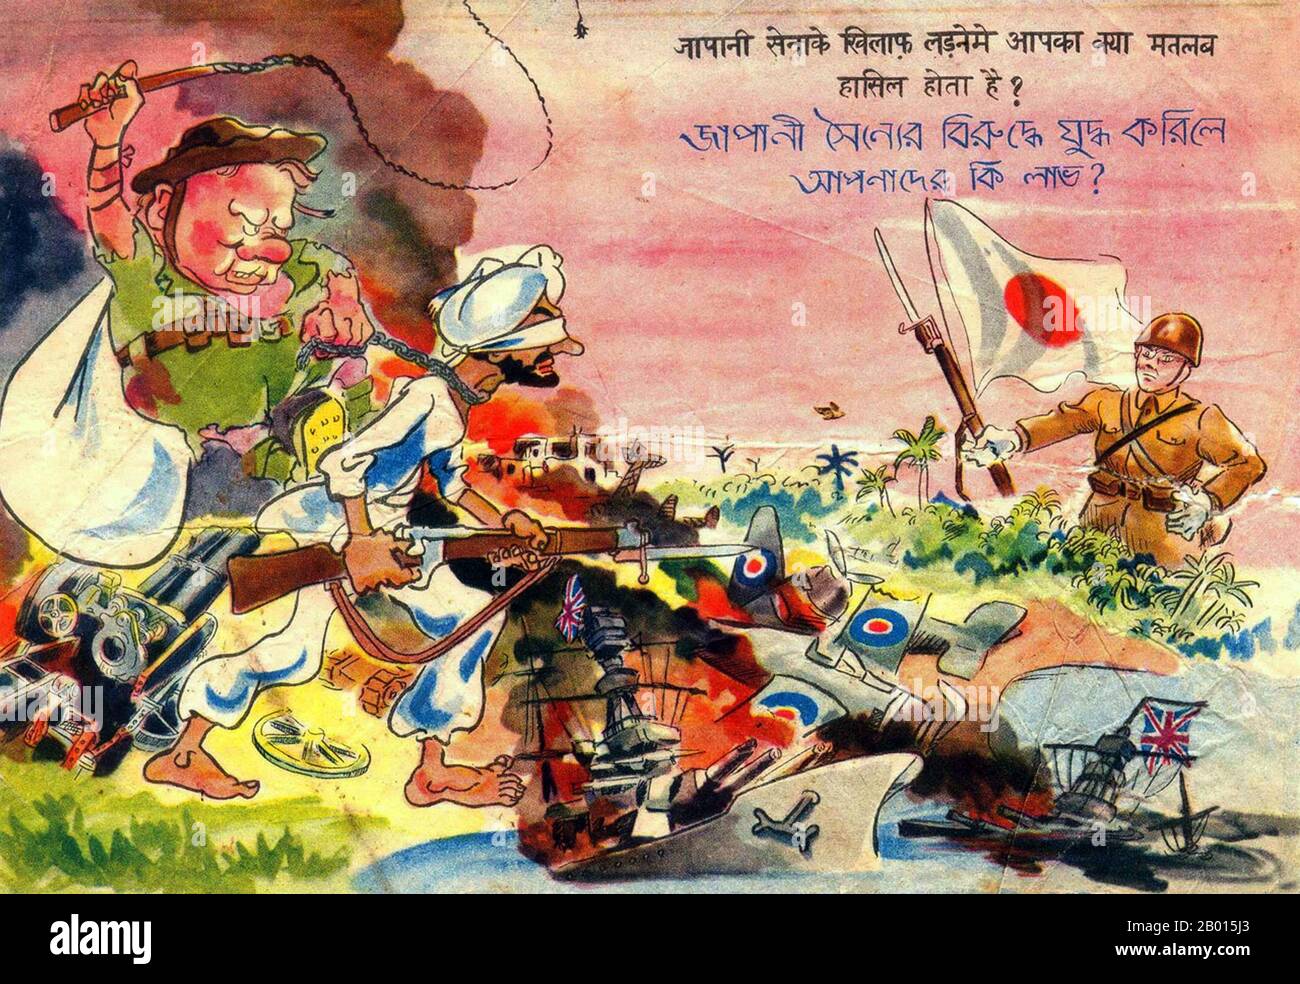 India: Japanese WWII propaganda leaflet depicts Churchill making a chained and blindfolded Indian advance against Japan, 1941.  China Burma India Theatre (CBI) was the name used by the United States Army for its forces operating in conjunction with British and Chinese Allied air and land forces in China, Burma, and India during World War II. Well-known US units in this theater included the Flying Tigers, transport and bomber units flying the Hump, the 1st Air Commando Group, the engineers who built Ledo Road, and the 5307th Composite Unit (Provisional), otherwise known as Merrill's Marauders. Stock Photo